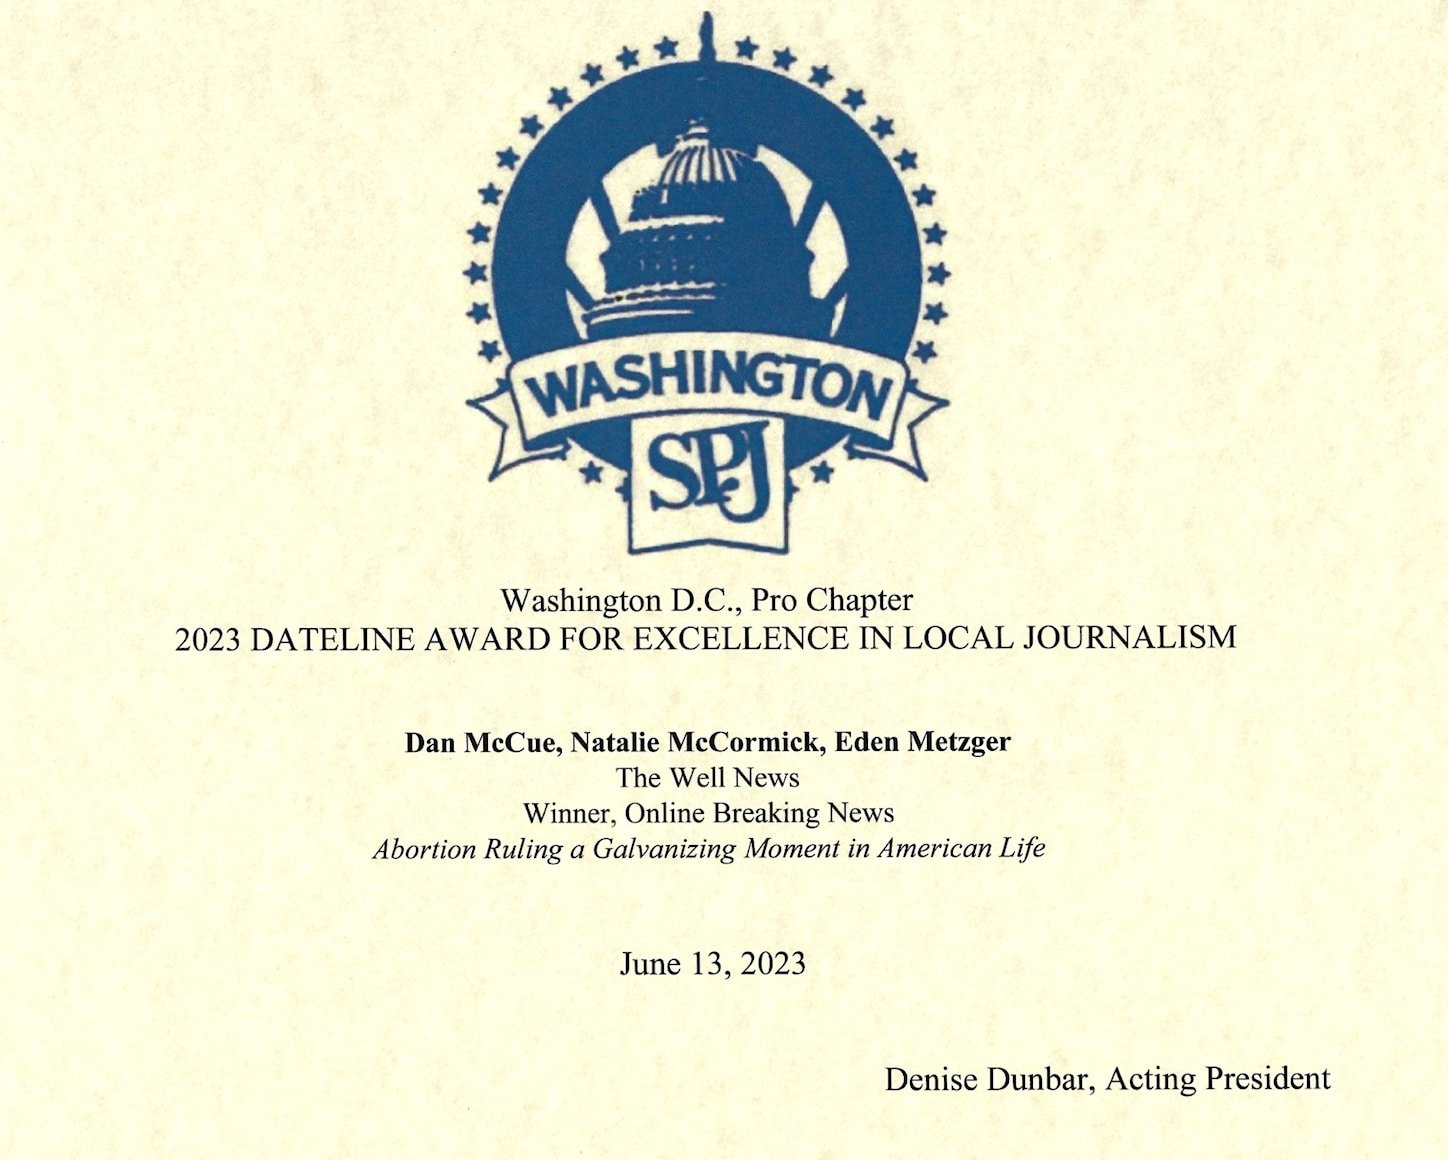 Well News Nets Top Honors at DCSPJ Dinner